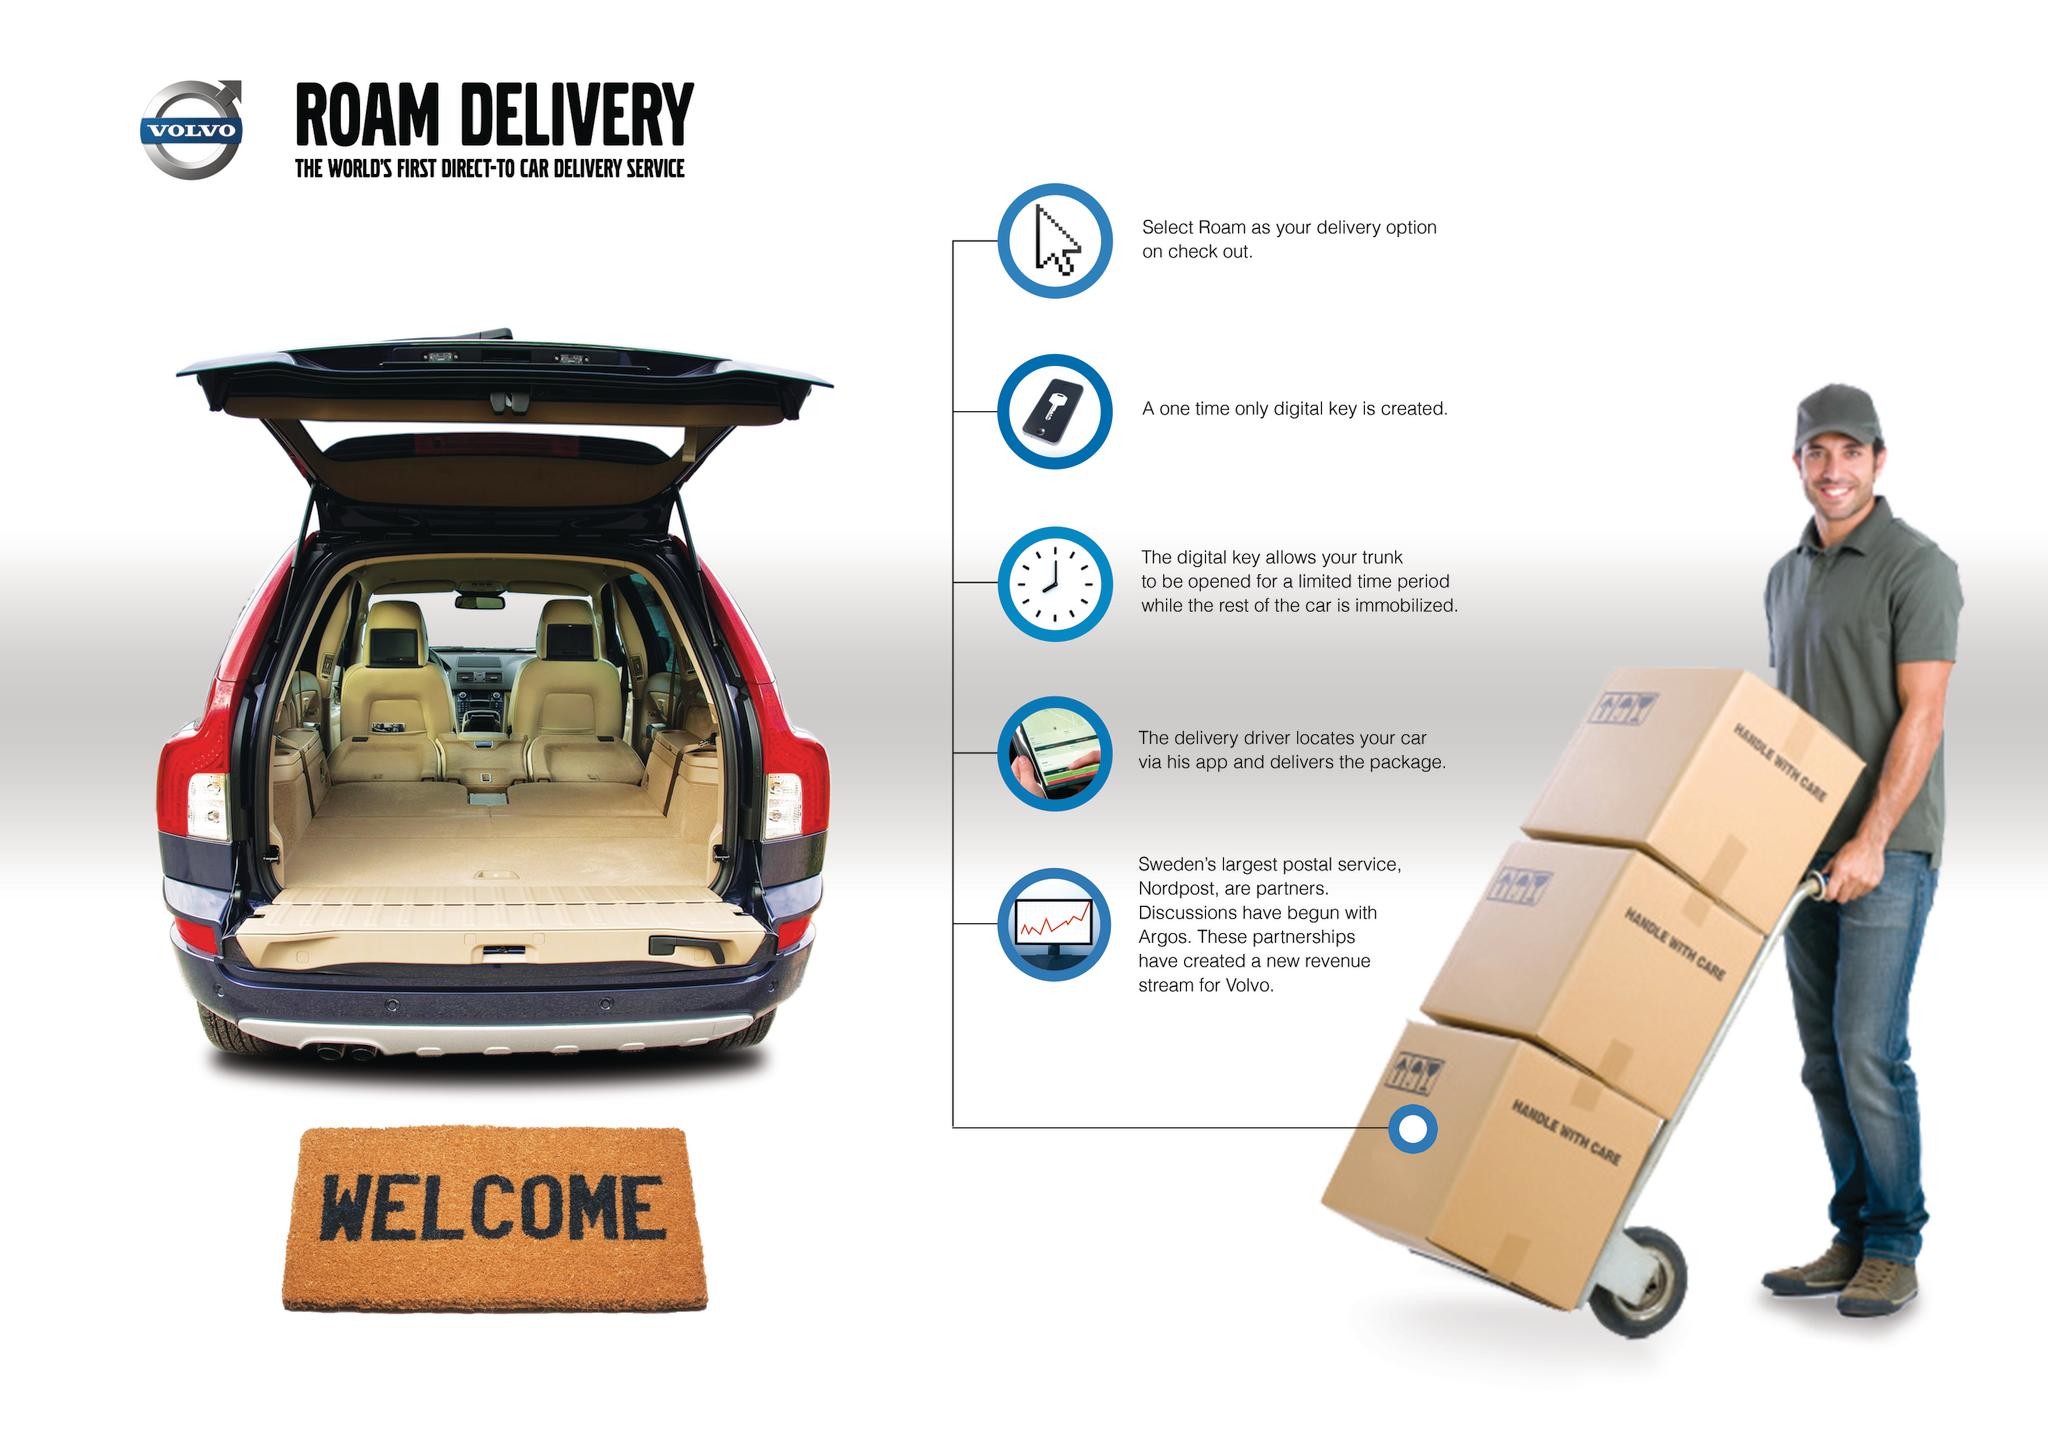 ROAM DELIVERY